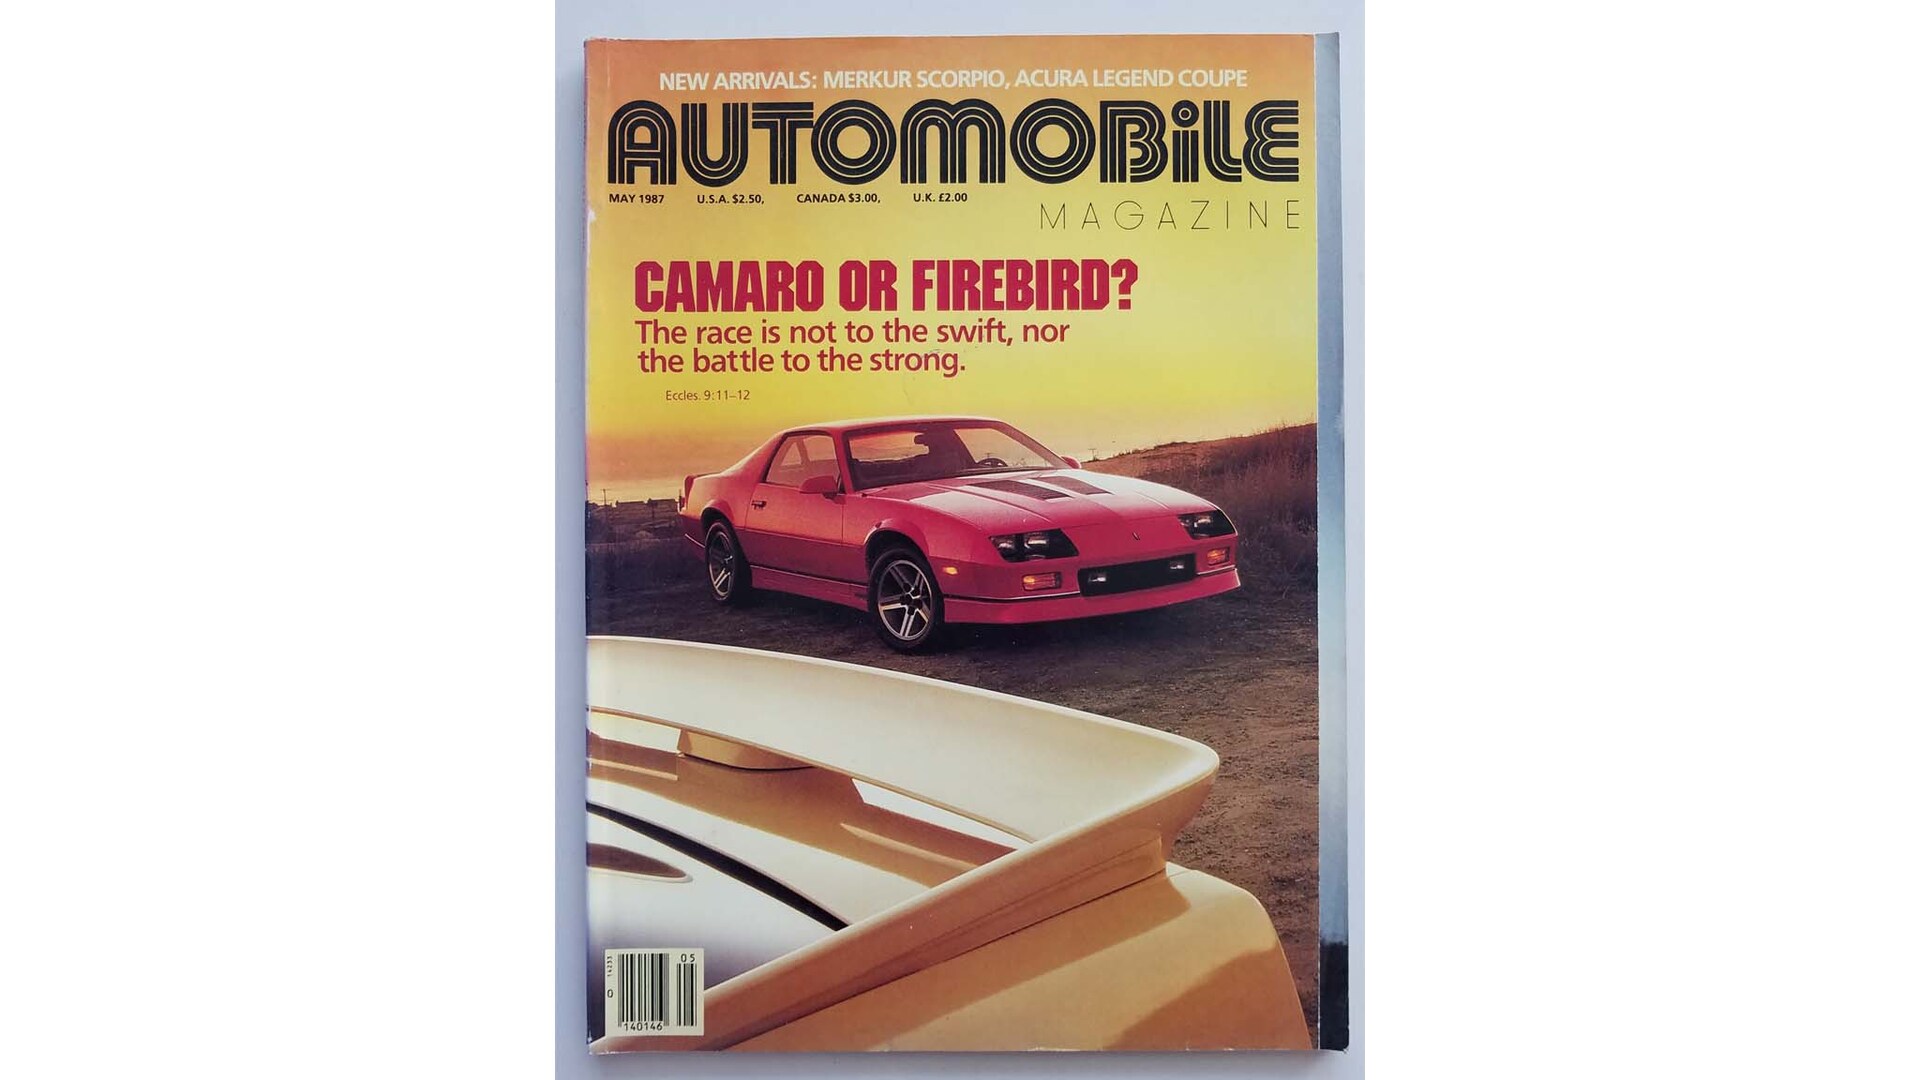 010 automobile mag may 1987 cover